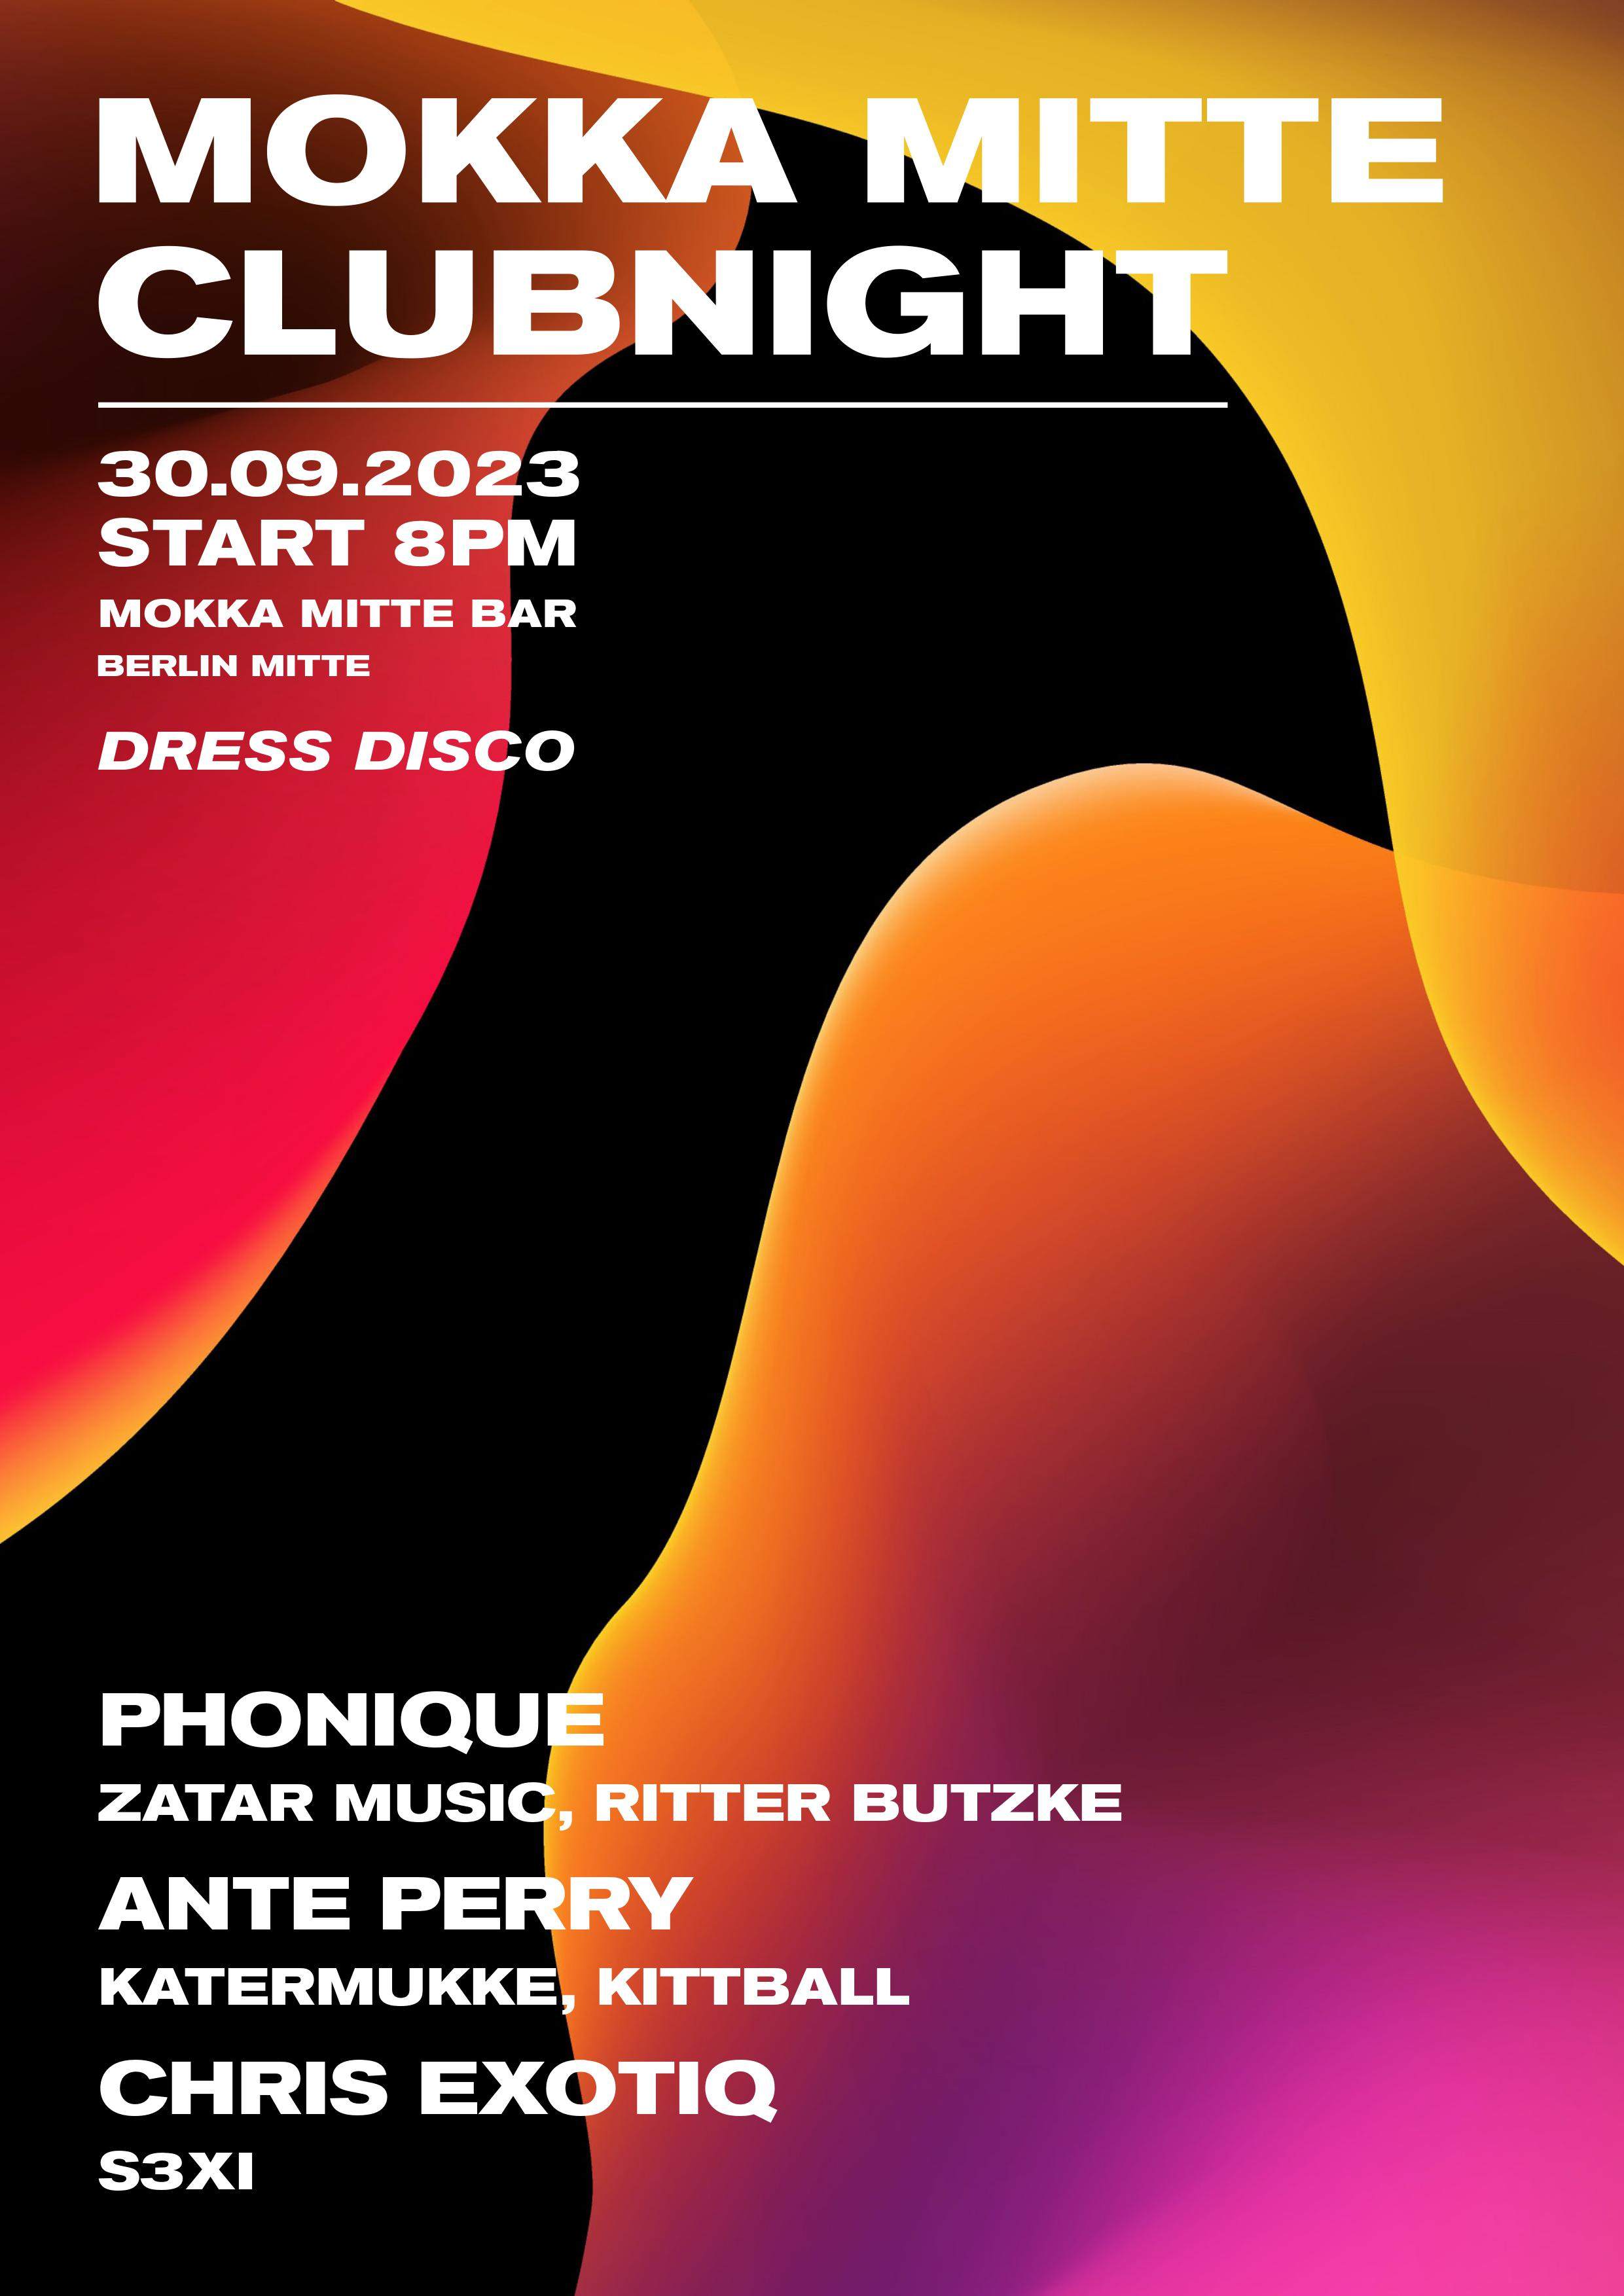 'Mokka Mitte Clubnight' with Phonique, Ante Perry & Chris Exotiq - フライヤー表